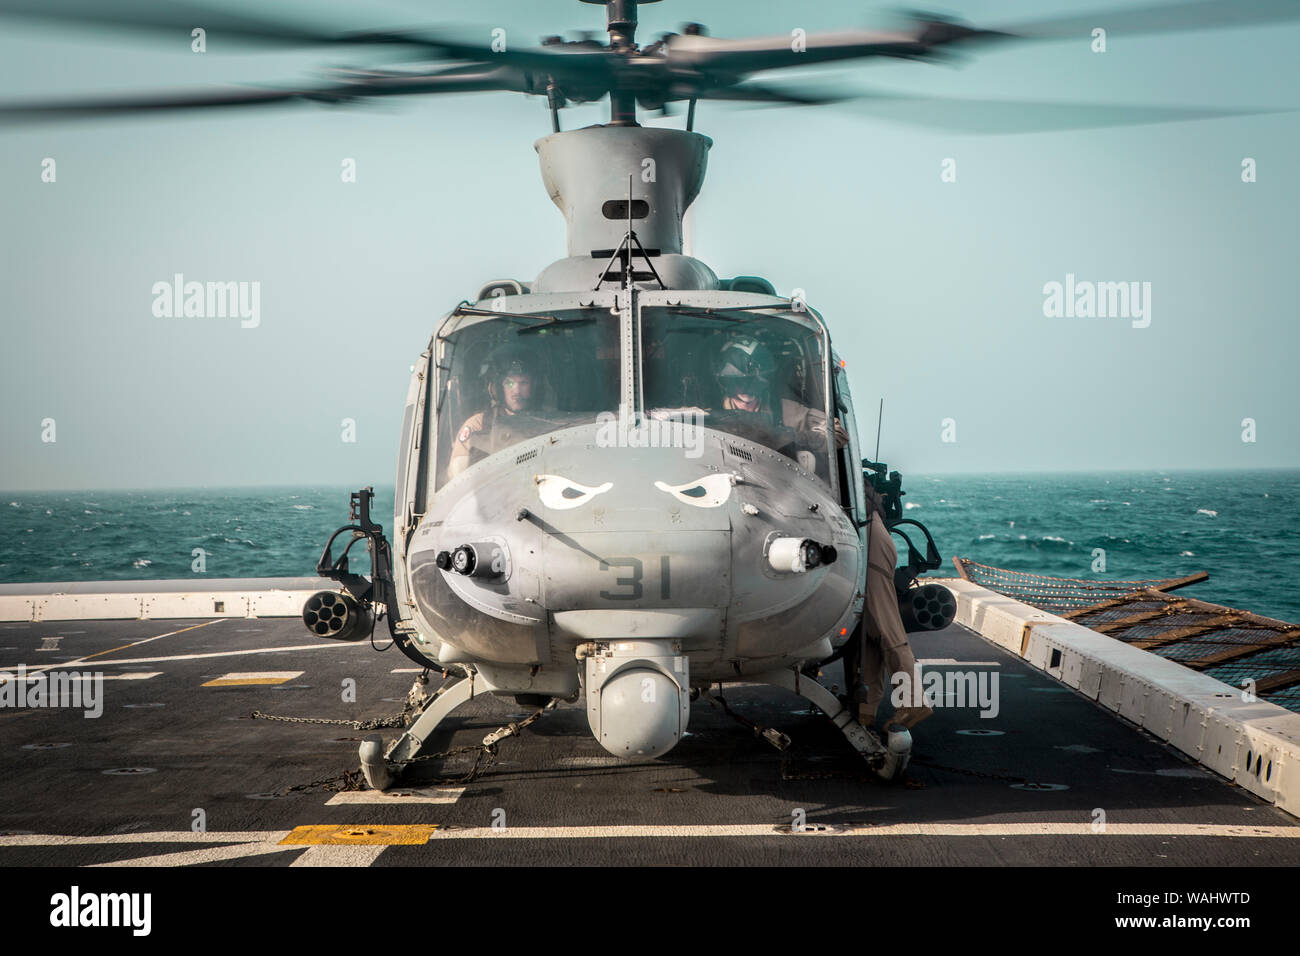 190815-M-QP663-1056 ARABIAN SEA (Aug. 15, 2019) Marines assigned to Marine Medium Tiltrotor Squadron (VMM) 163 (Reinforced), 11th Marine Expeditionary Unit (MEU), conduct pre-flight checks in a UH-1Y Venom aboard the amphibious transport dock ship USS John P. Murtha (LPD 26). The Boxer Amphibious Ready Group and 11th MEU are deployed to the U.S. 5th Fleet area of operations in support of naval operations to ensure maritime stability and security in the Central Region, connecting the Mediterranean and the Pacific through the Western Indian Ocean and three strategic choke points. (U.S. Marine Co Stock Photo